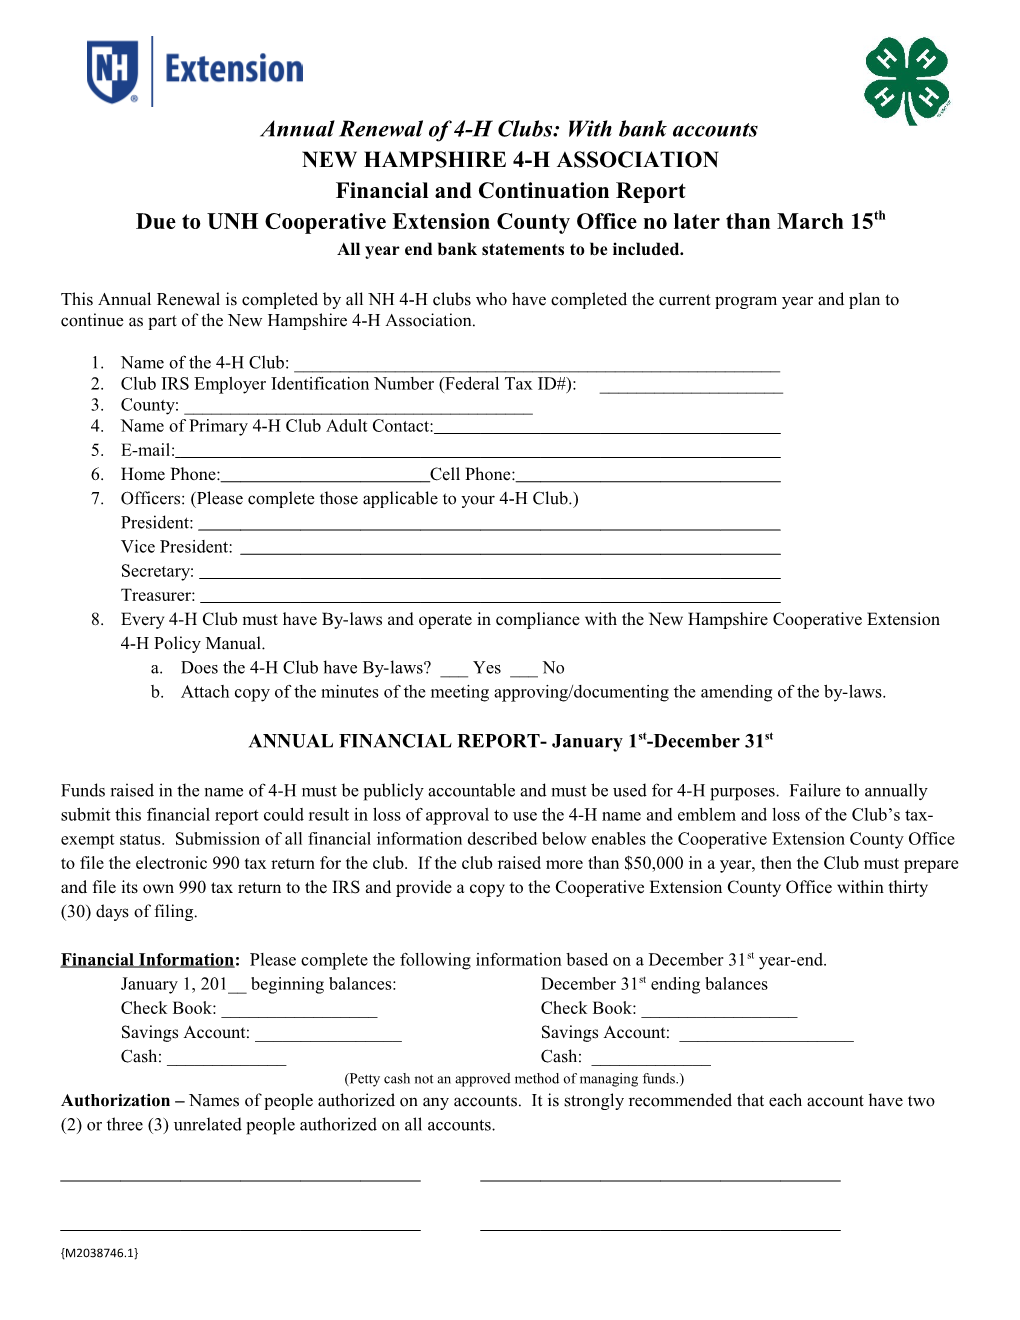 NH 4-H Association: Financial Reporting for Clubs with Bank Acct